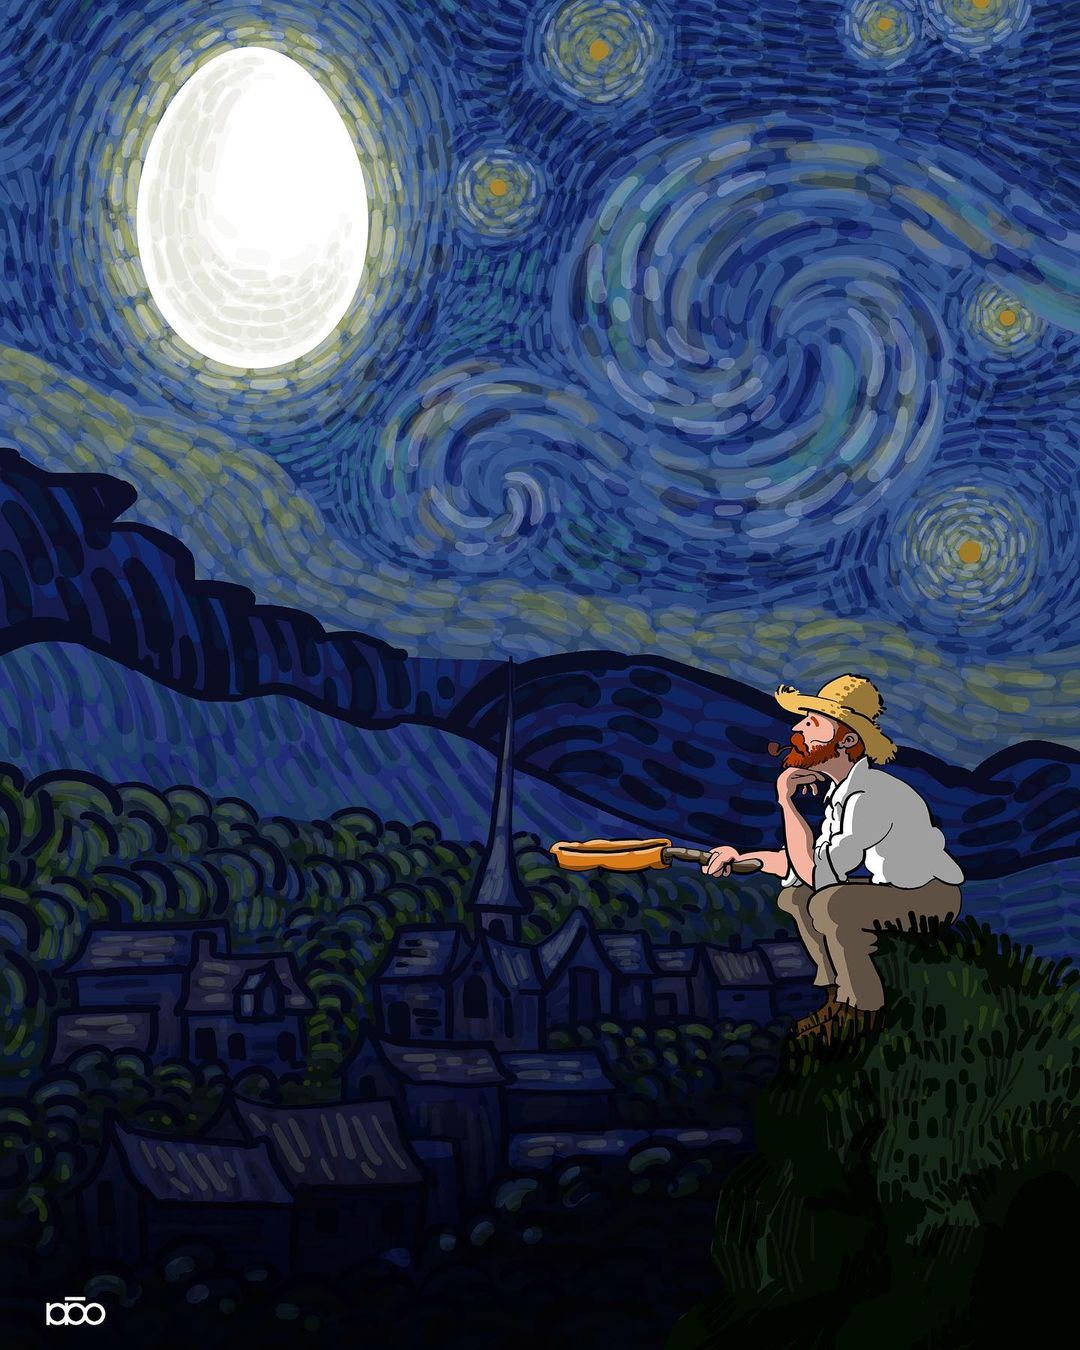 Vincent Van Goghs Life Recreated In His Own Art Style By Alireza Karimi Moghaddam 11